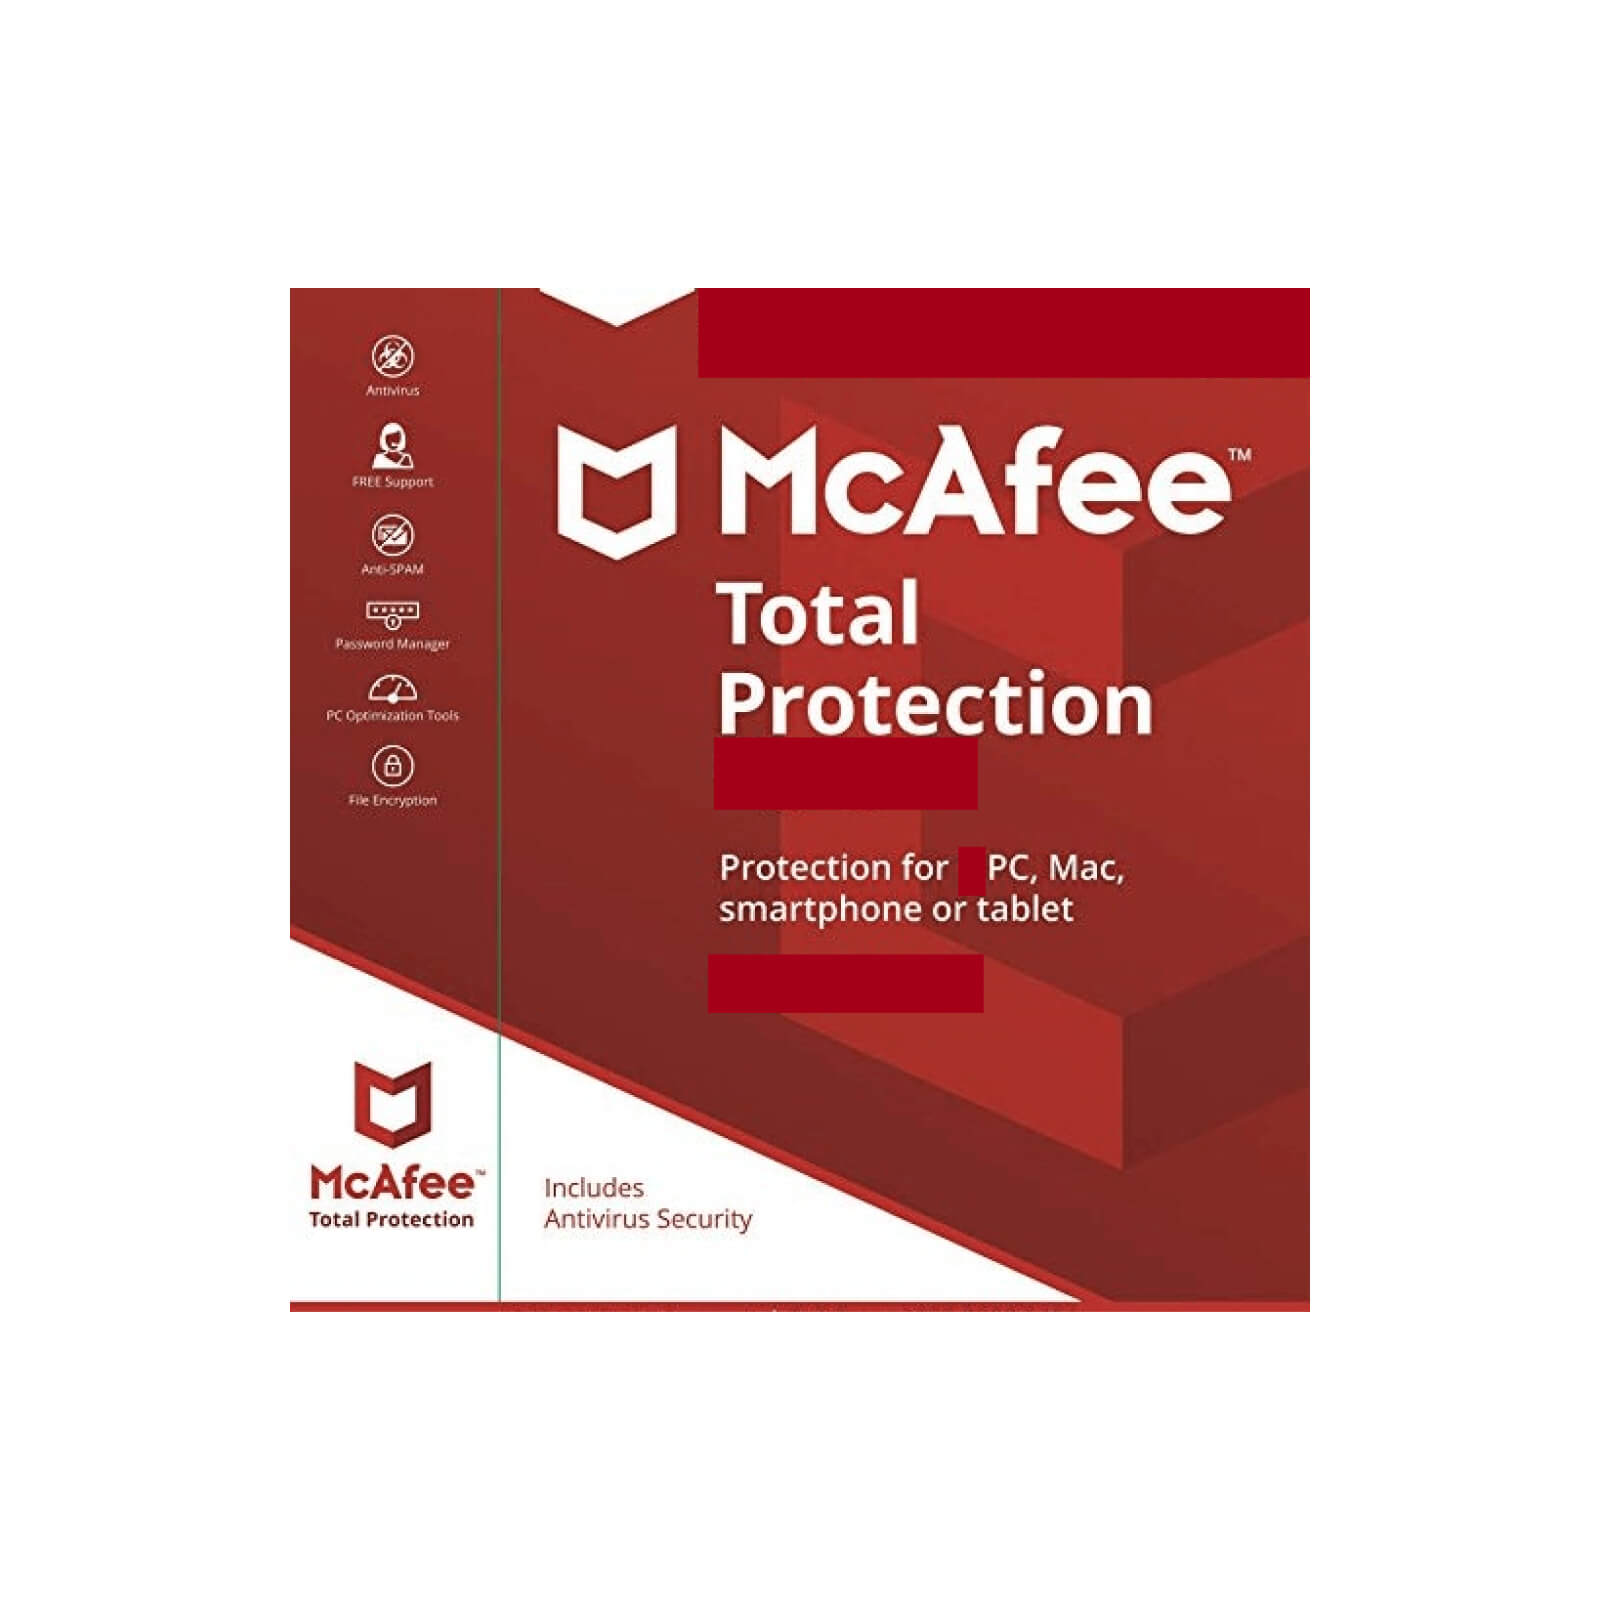 mcafee total protection price